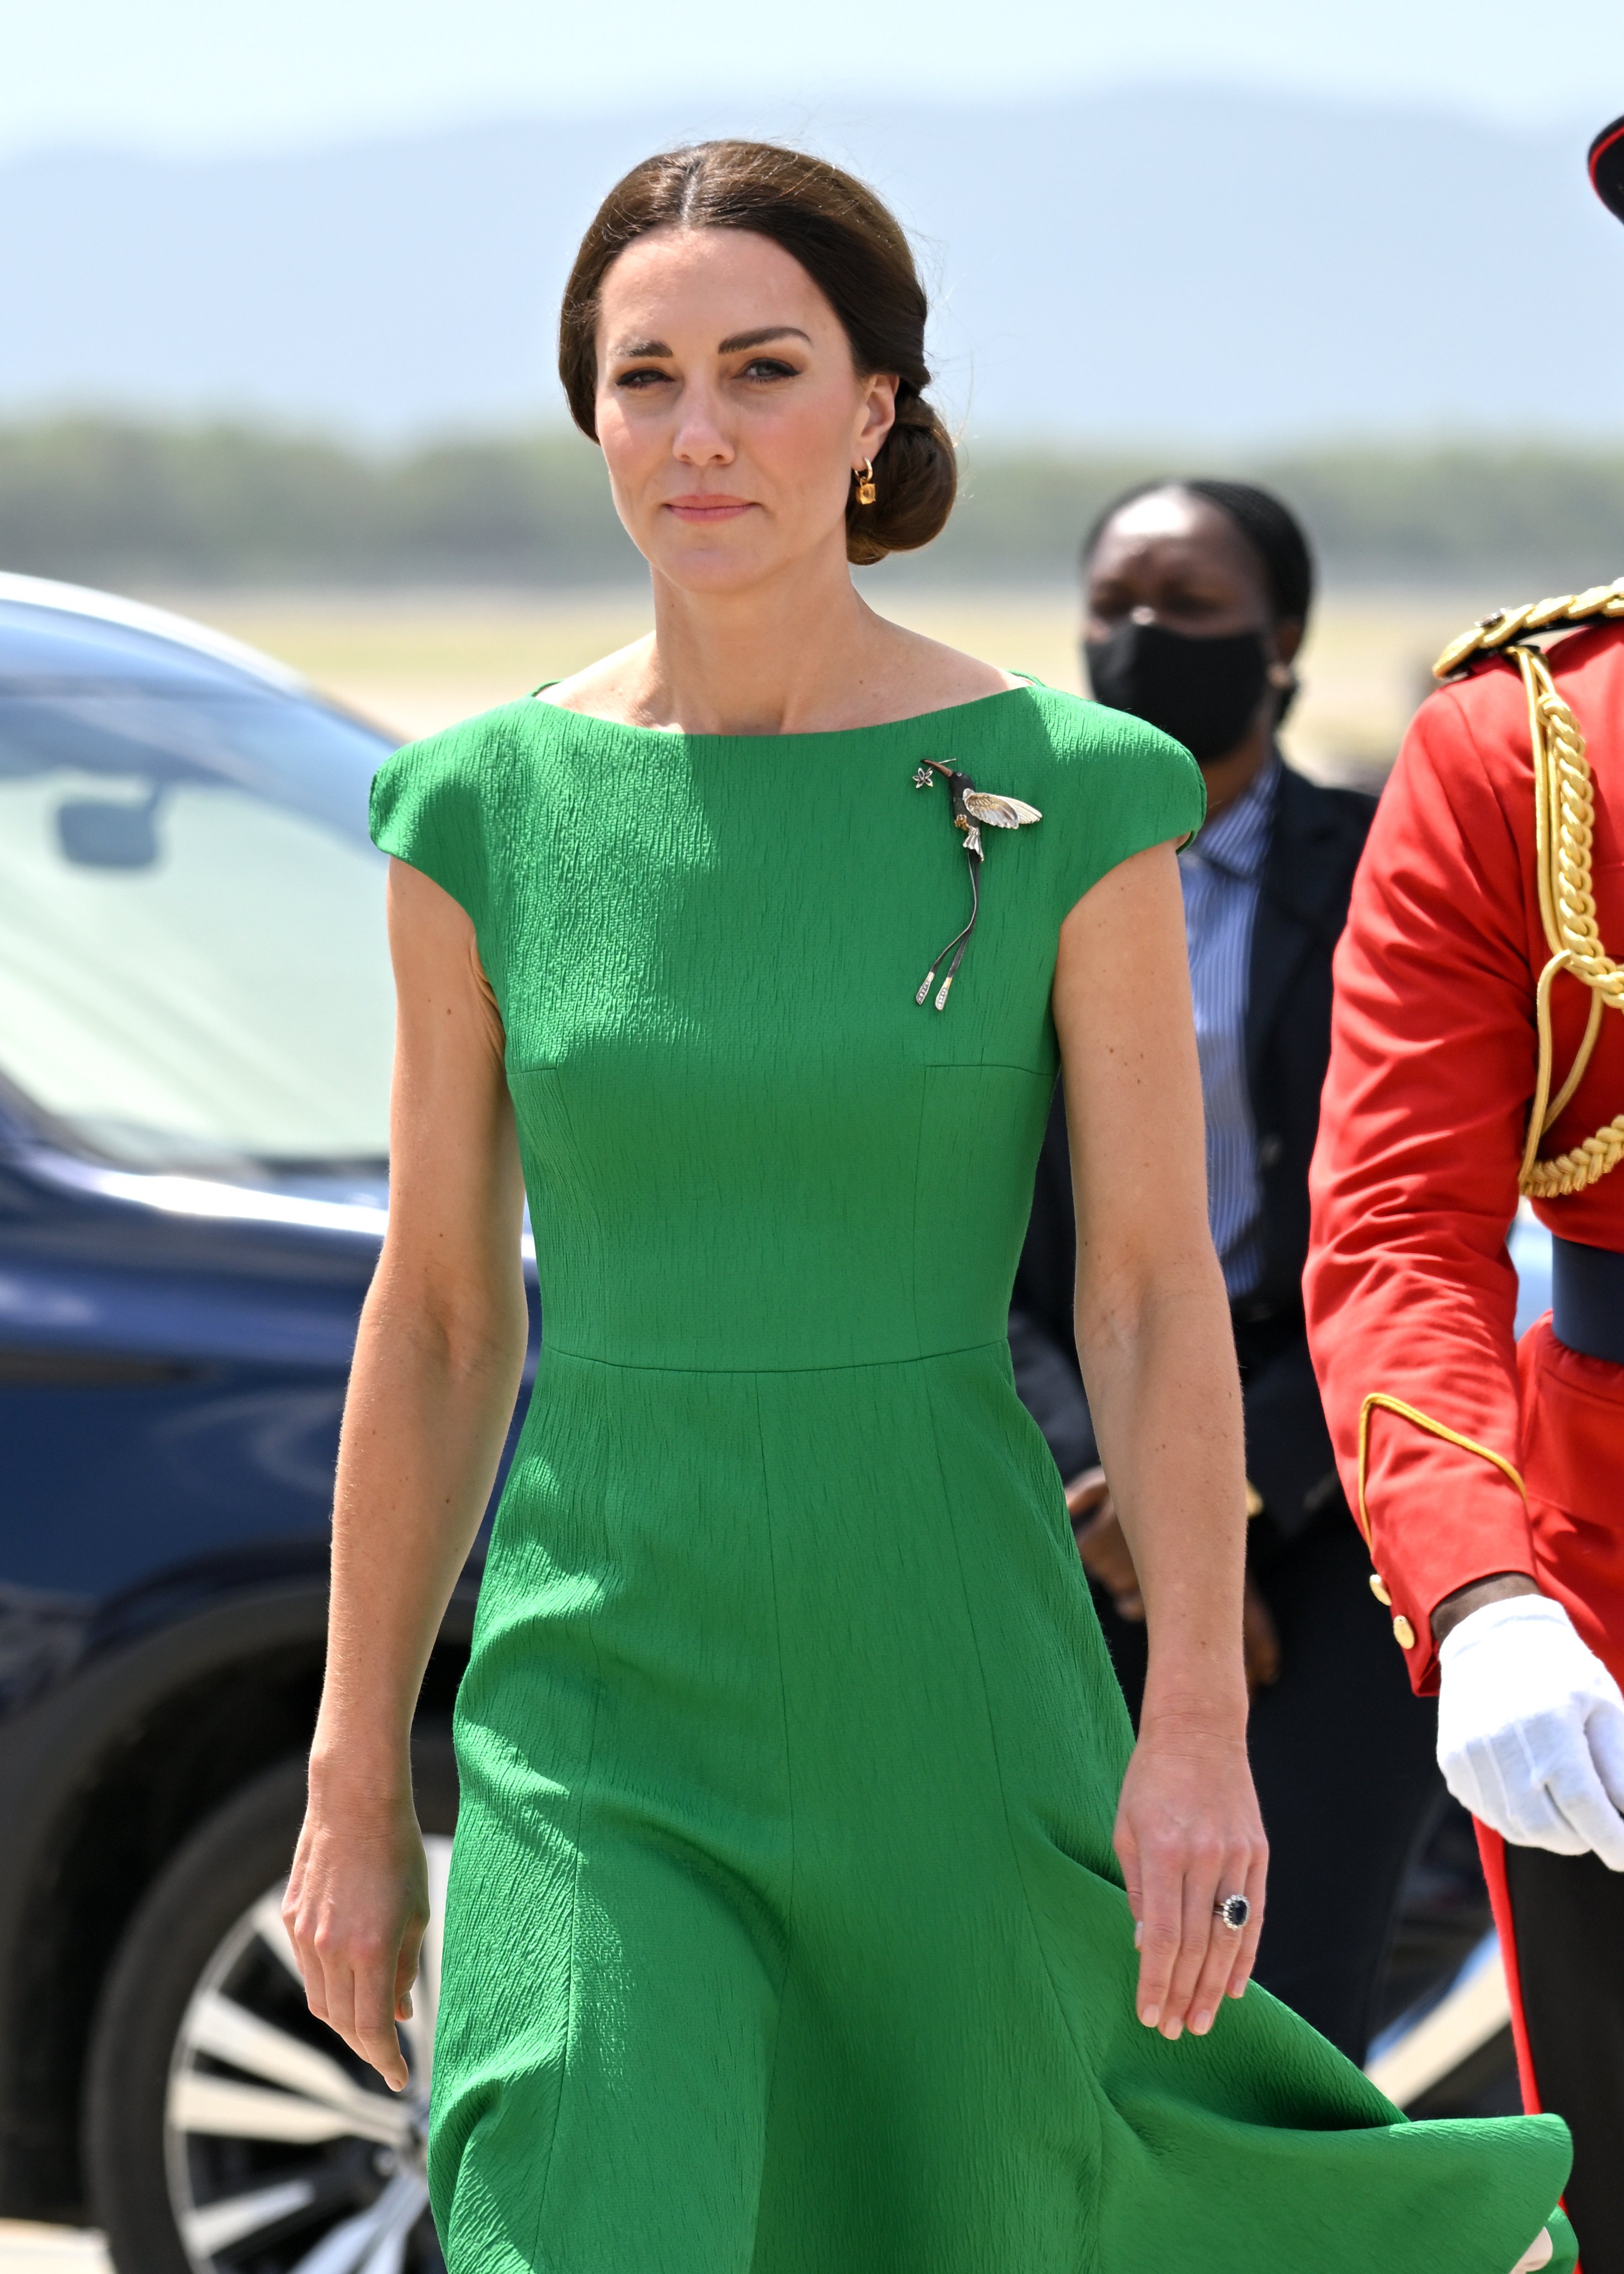 Catherine, Duchess of Cambridge ahead of her departure on RAF Voyager with Prince William, Duke of Cambridge from Norman Manley International Airport on day six of the Platinum Jubilee Royal Tour of the Caribbean on March 24, 2022 in Kingston, Jamaica. | Source: Getty Images